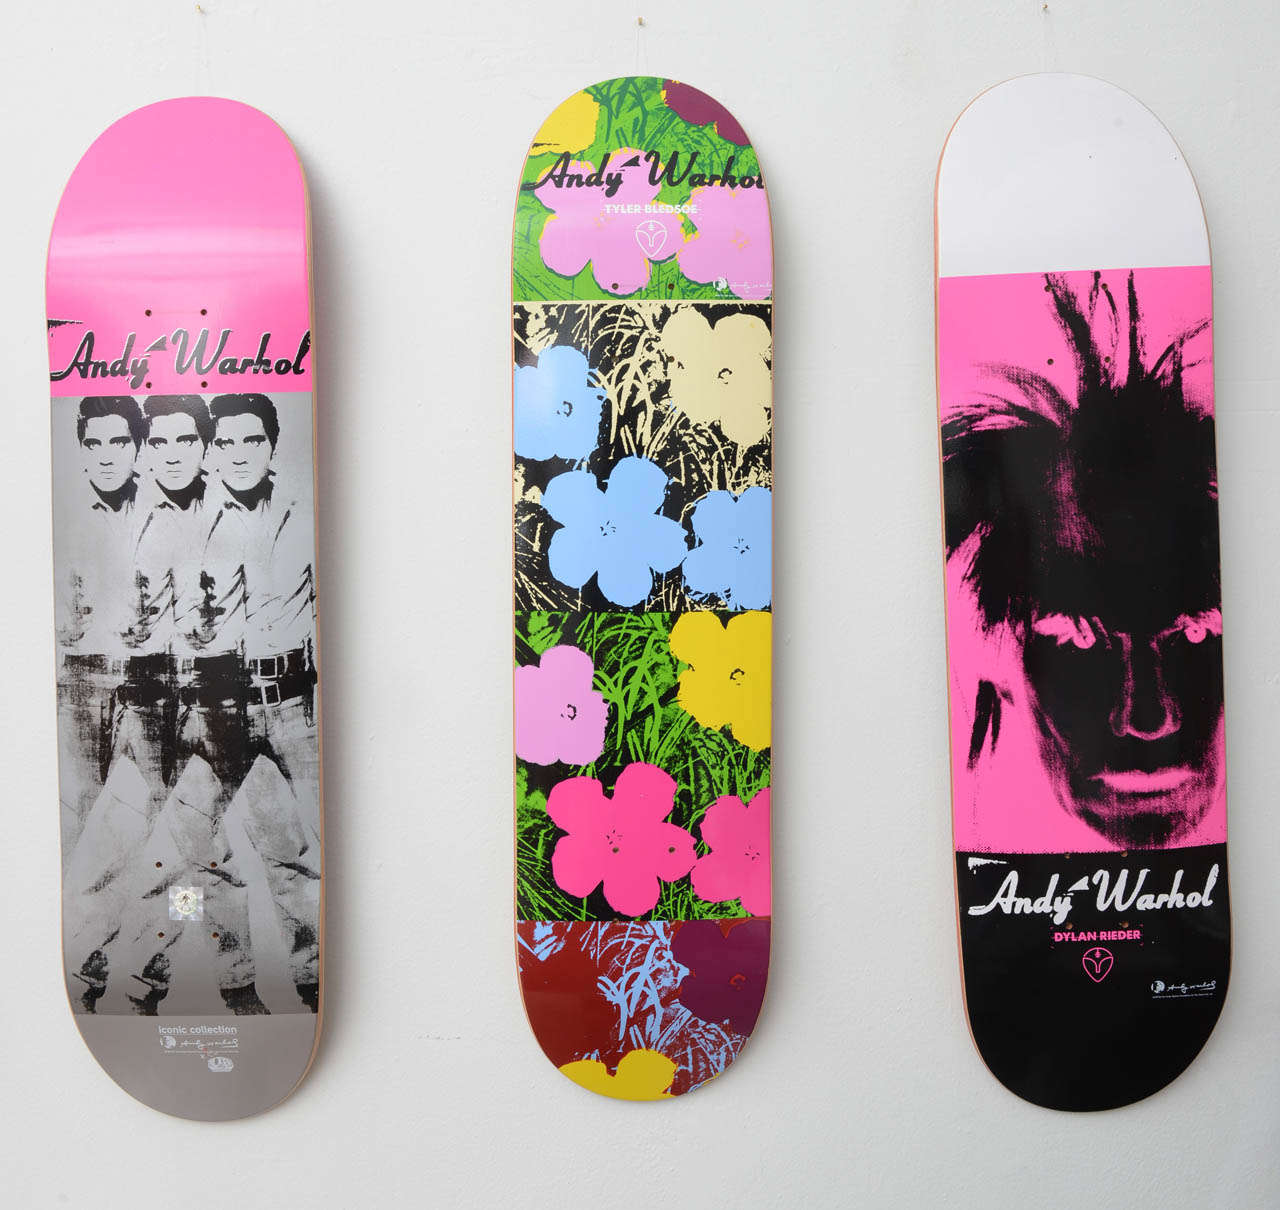 Set of 6 Authorized Andy Warhol Skateboards from 20th Century 3